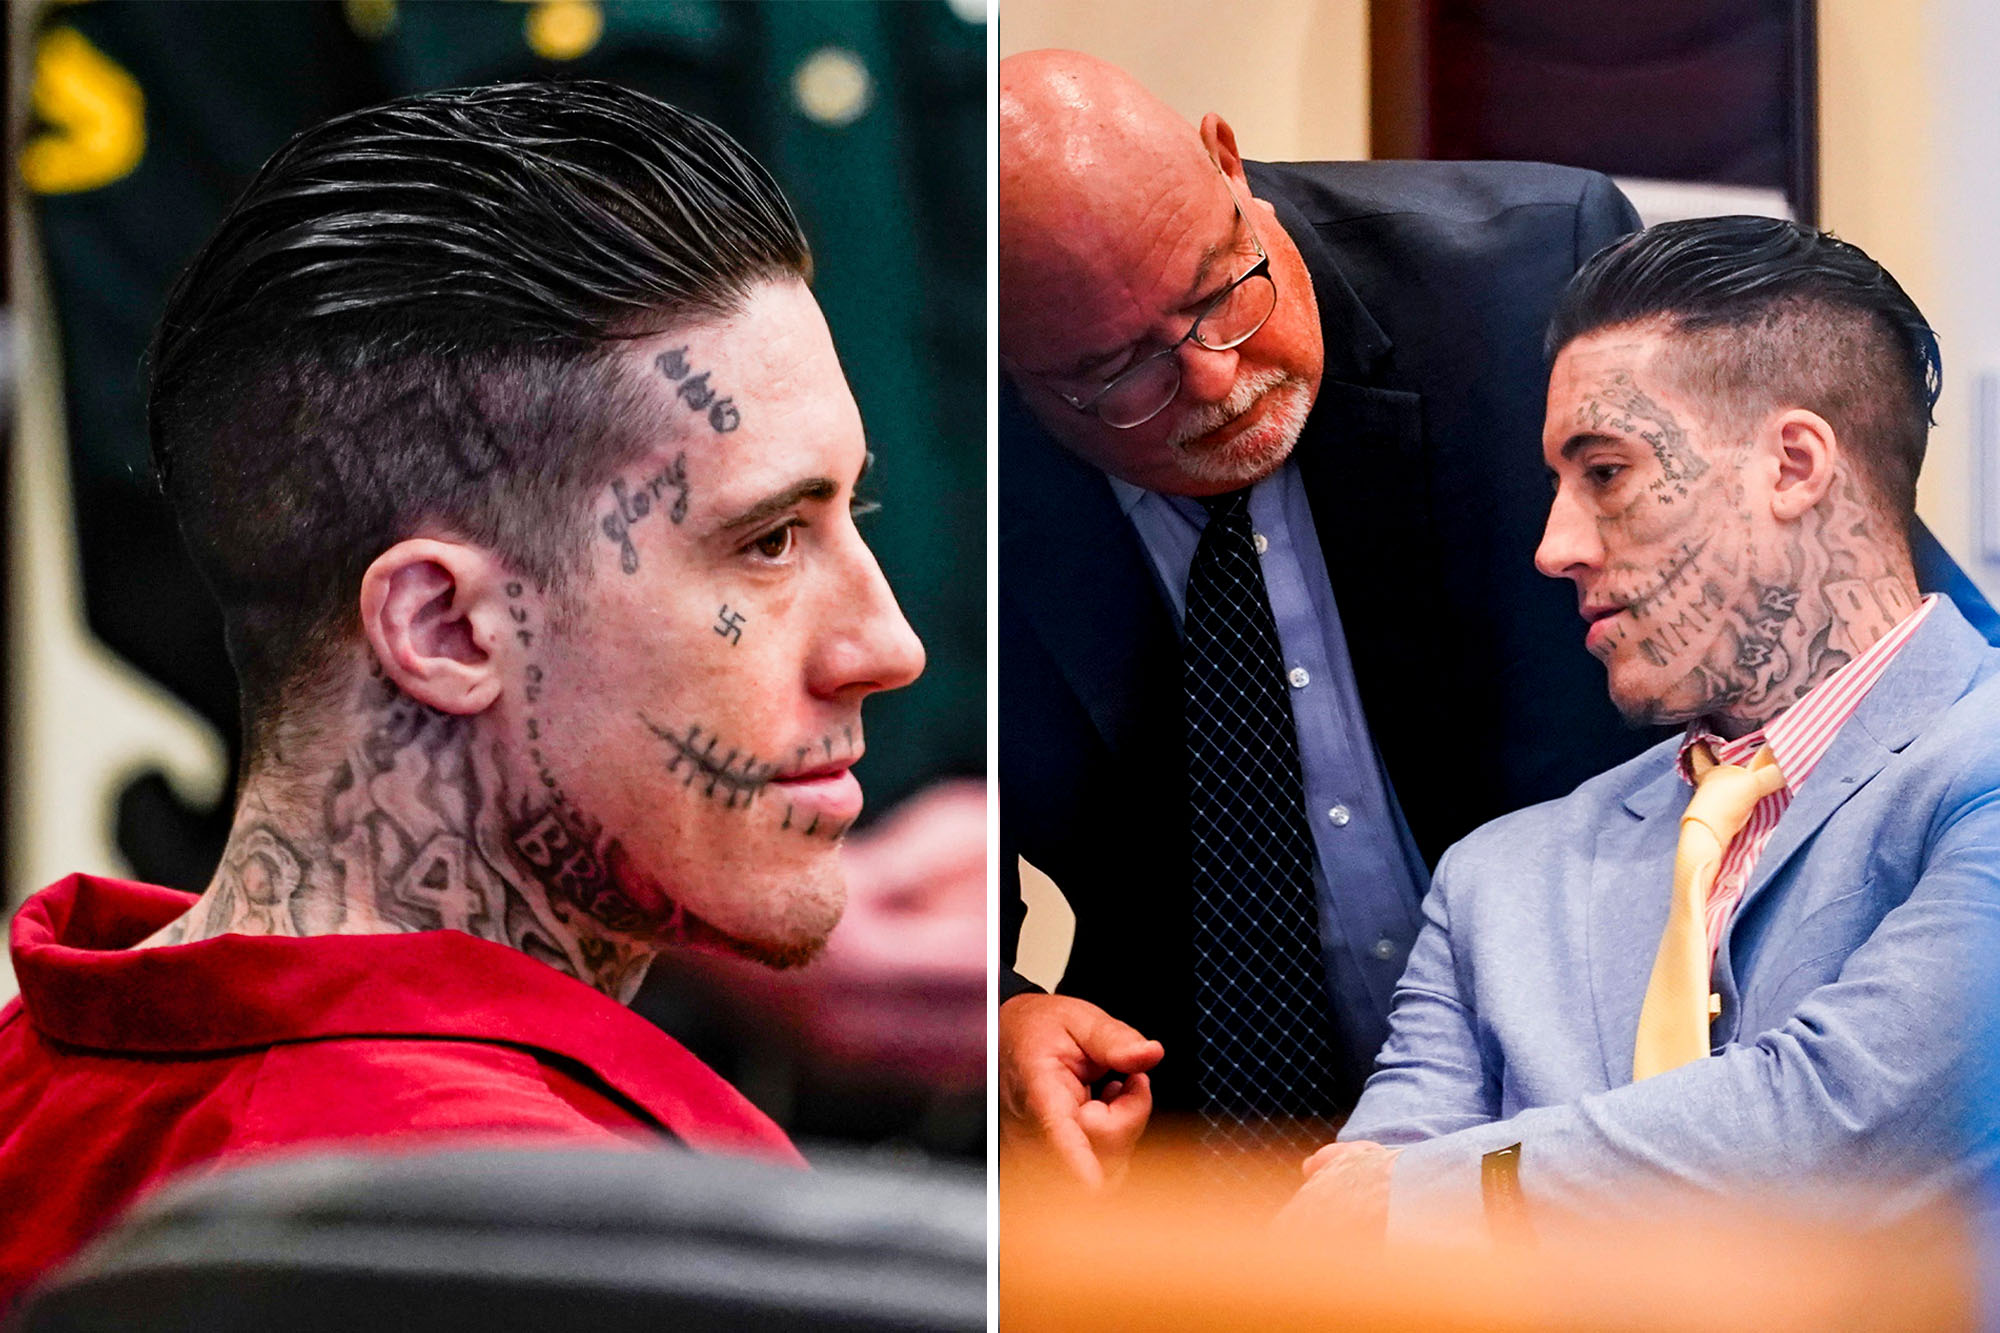 Accused double murderer allowed to cover swastika and skeleton face tattoos — but they're still showing